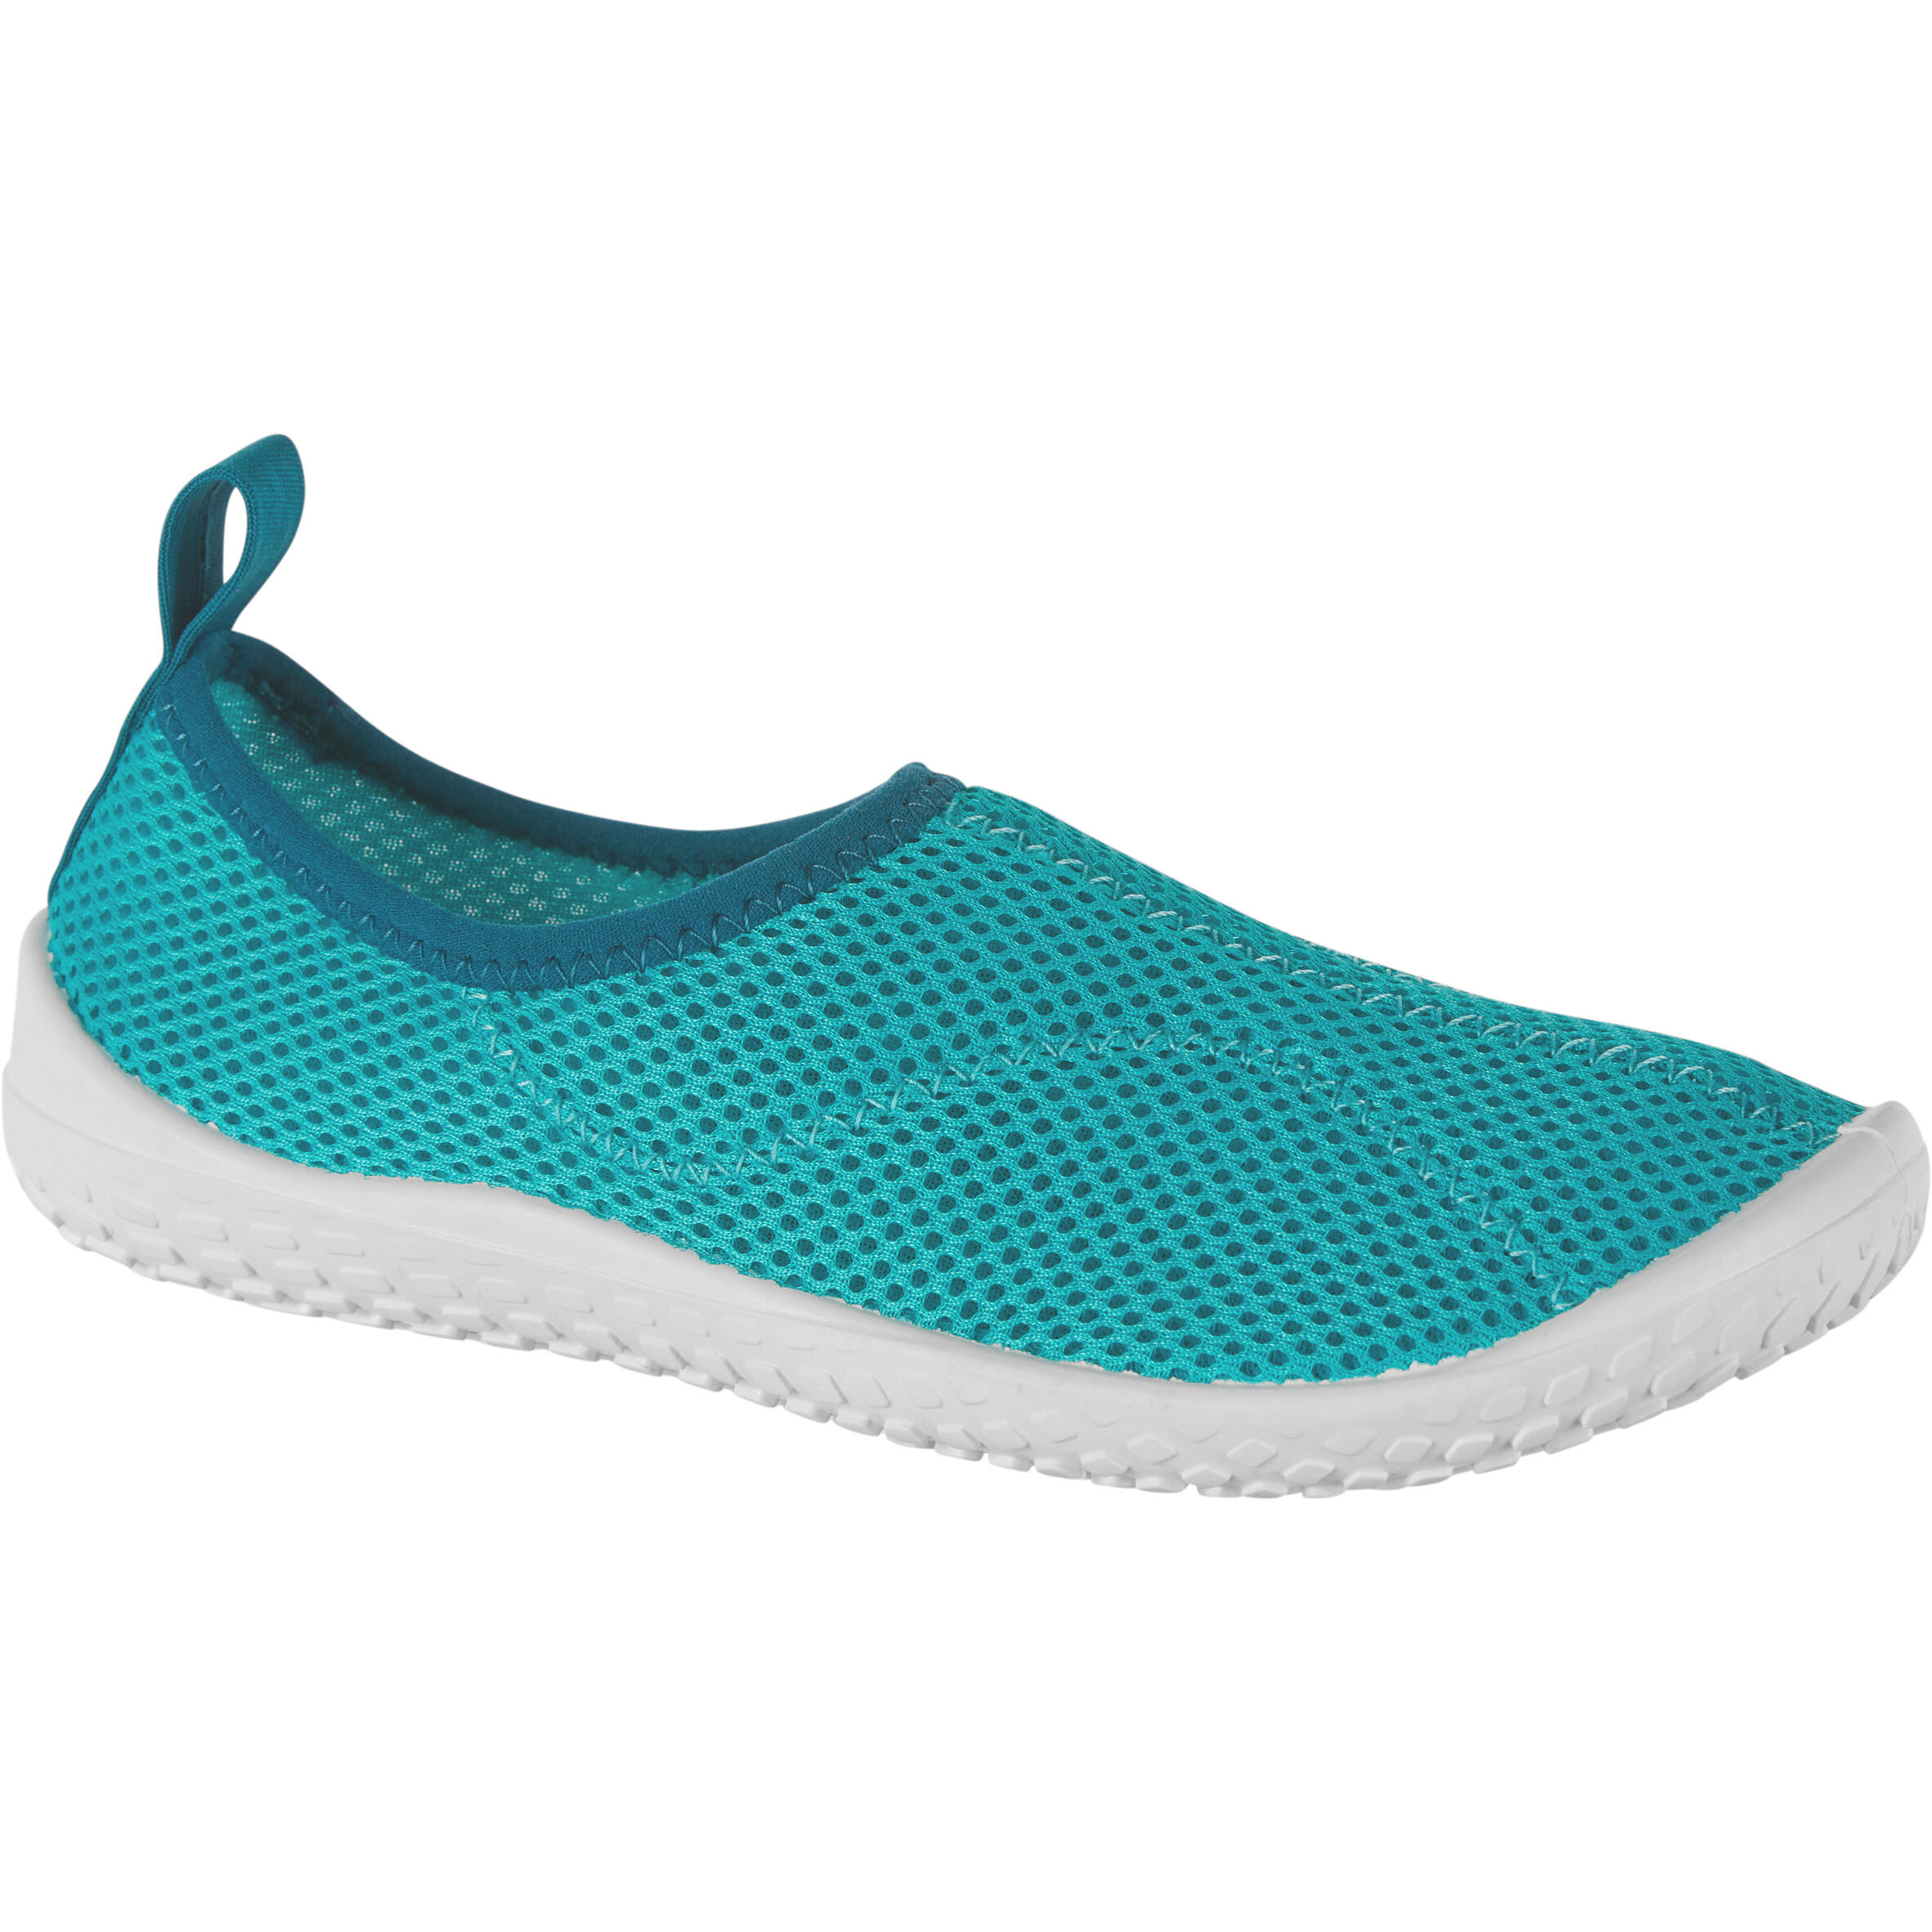 Water shoes /Aquashoes Buy Online 